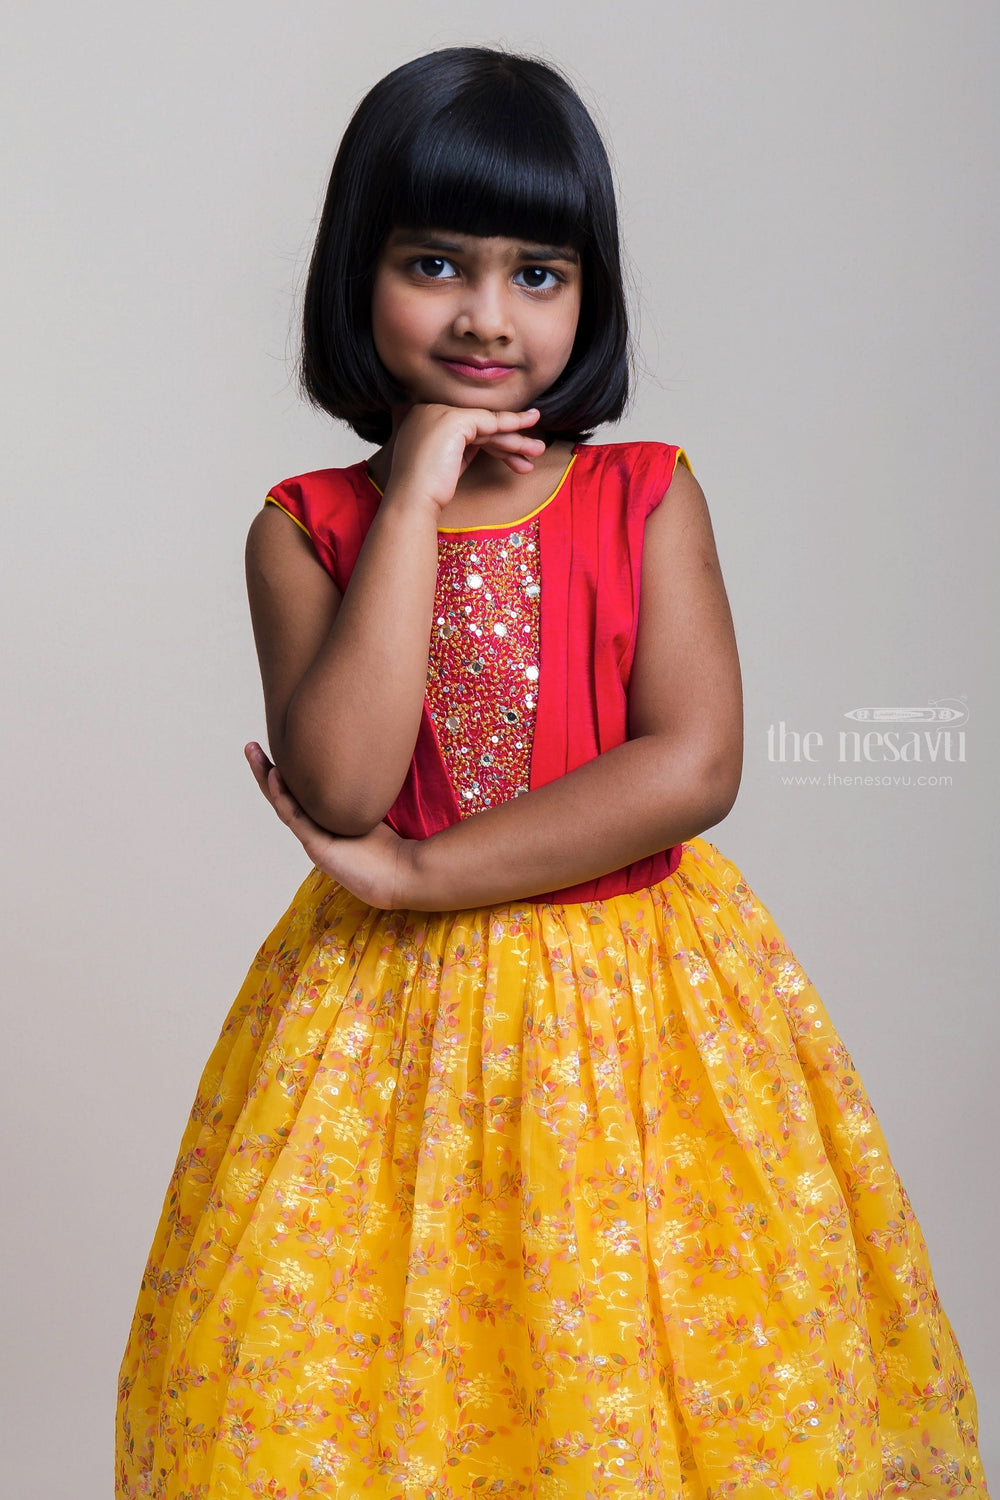 The Nesavu Girls Fancy Party Frock Party Time - Latest Georgette Frocks With Embroidery Designs For Girls Nesavu